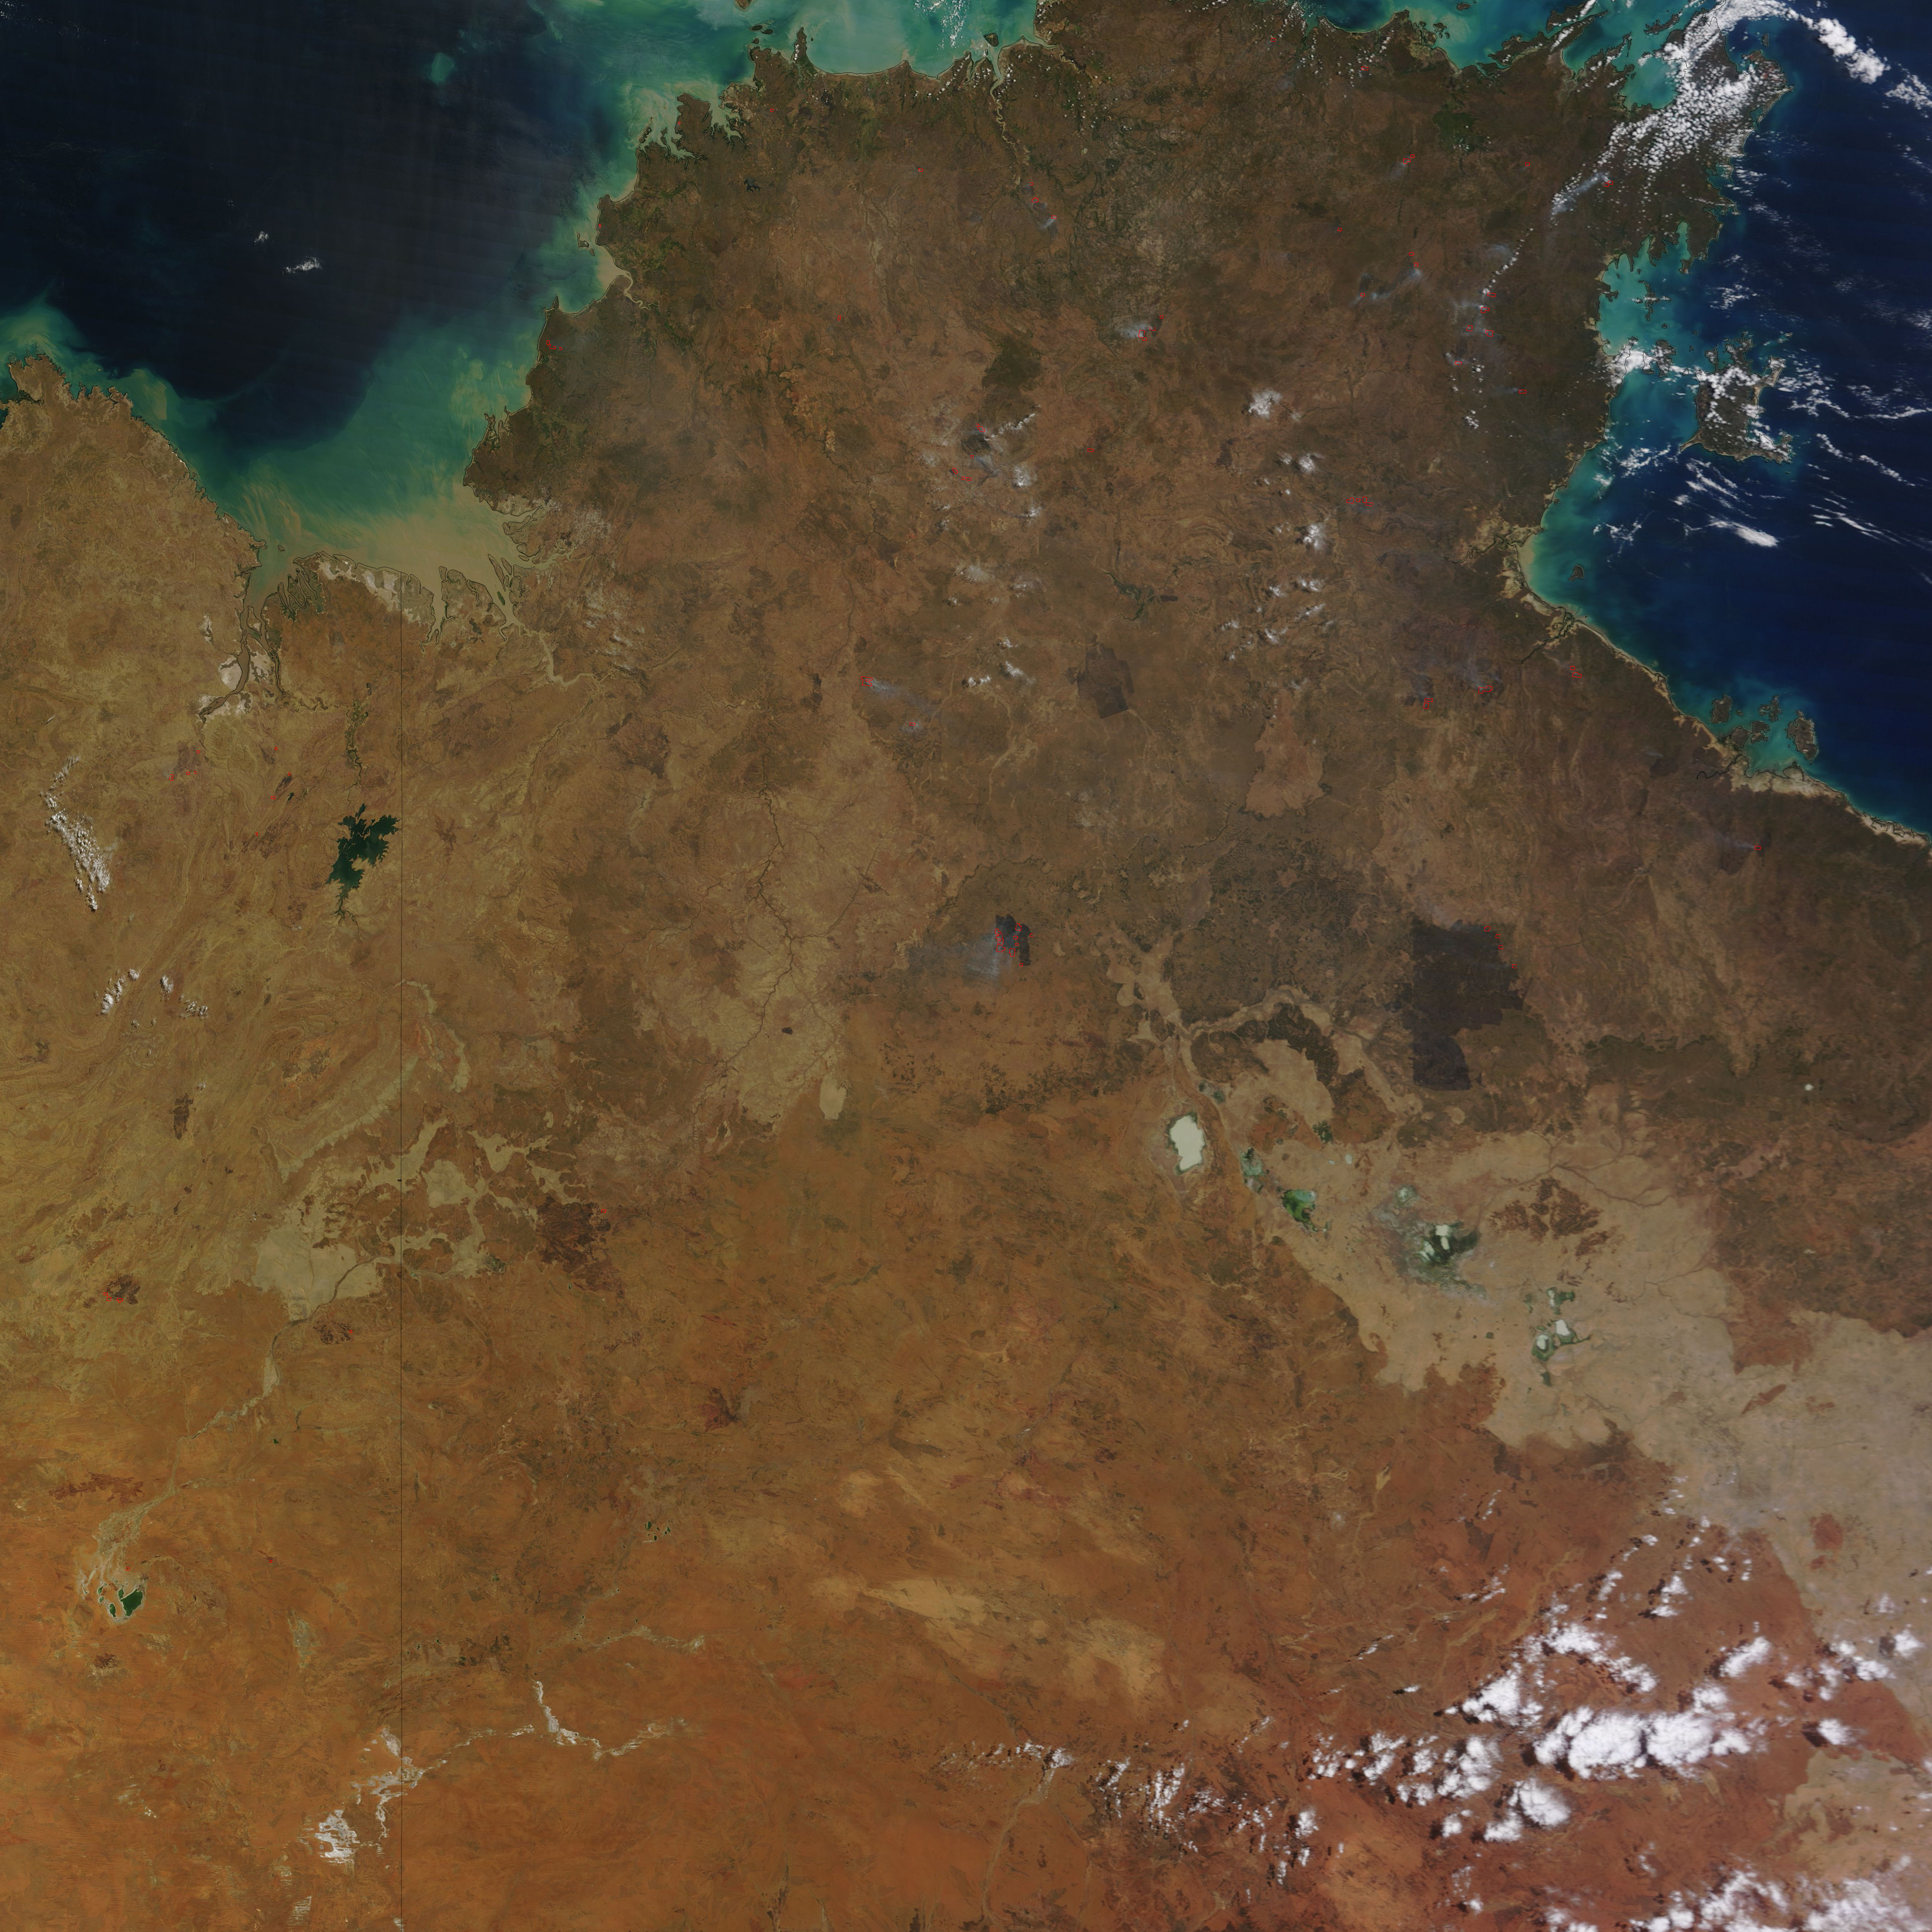 Expanding Burn Scar in Northern Territory - related image preview